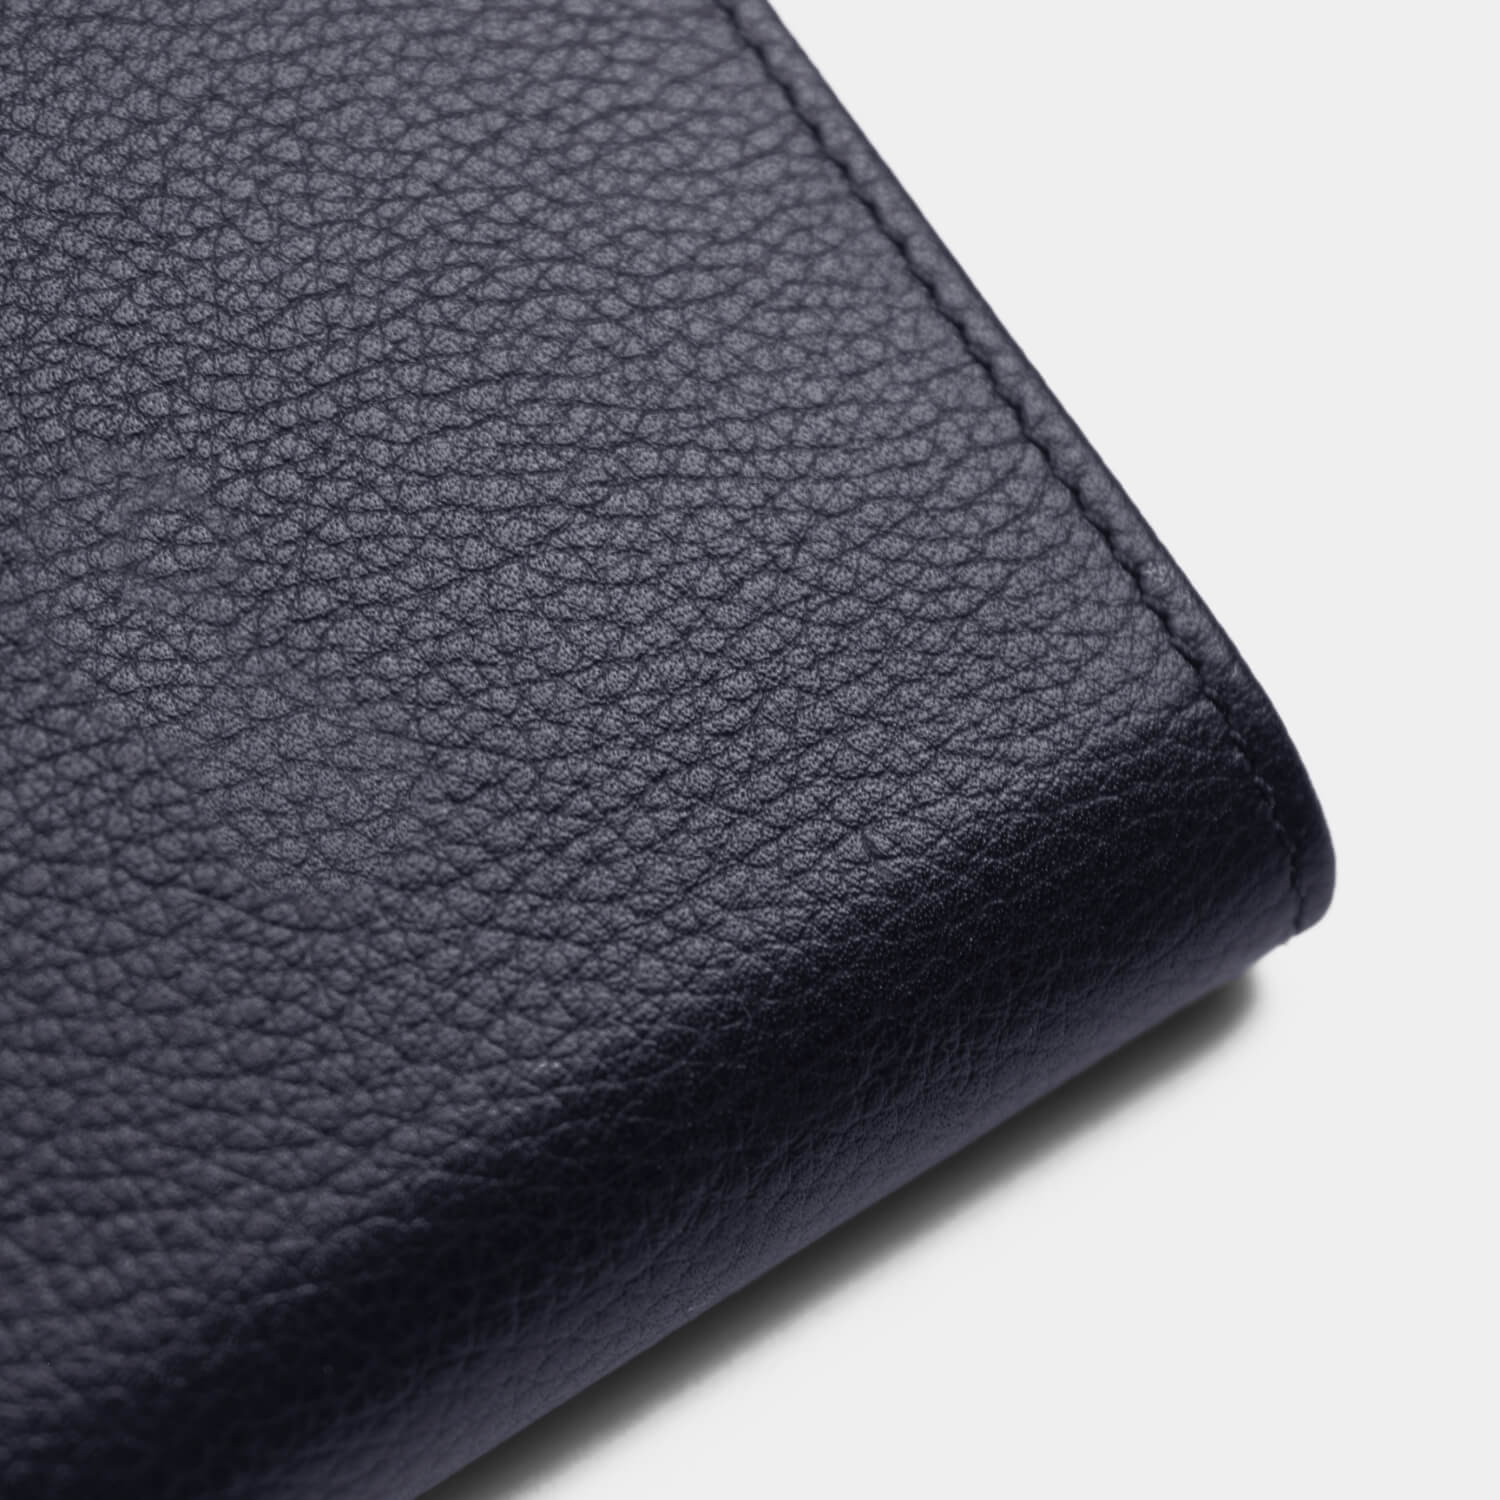 A6 fine grain leather notebook cover with lined or plain 80gsm paper